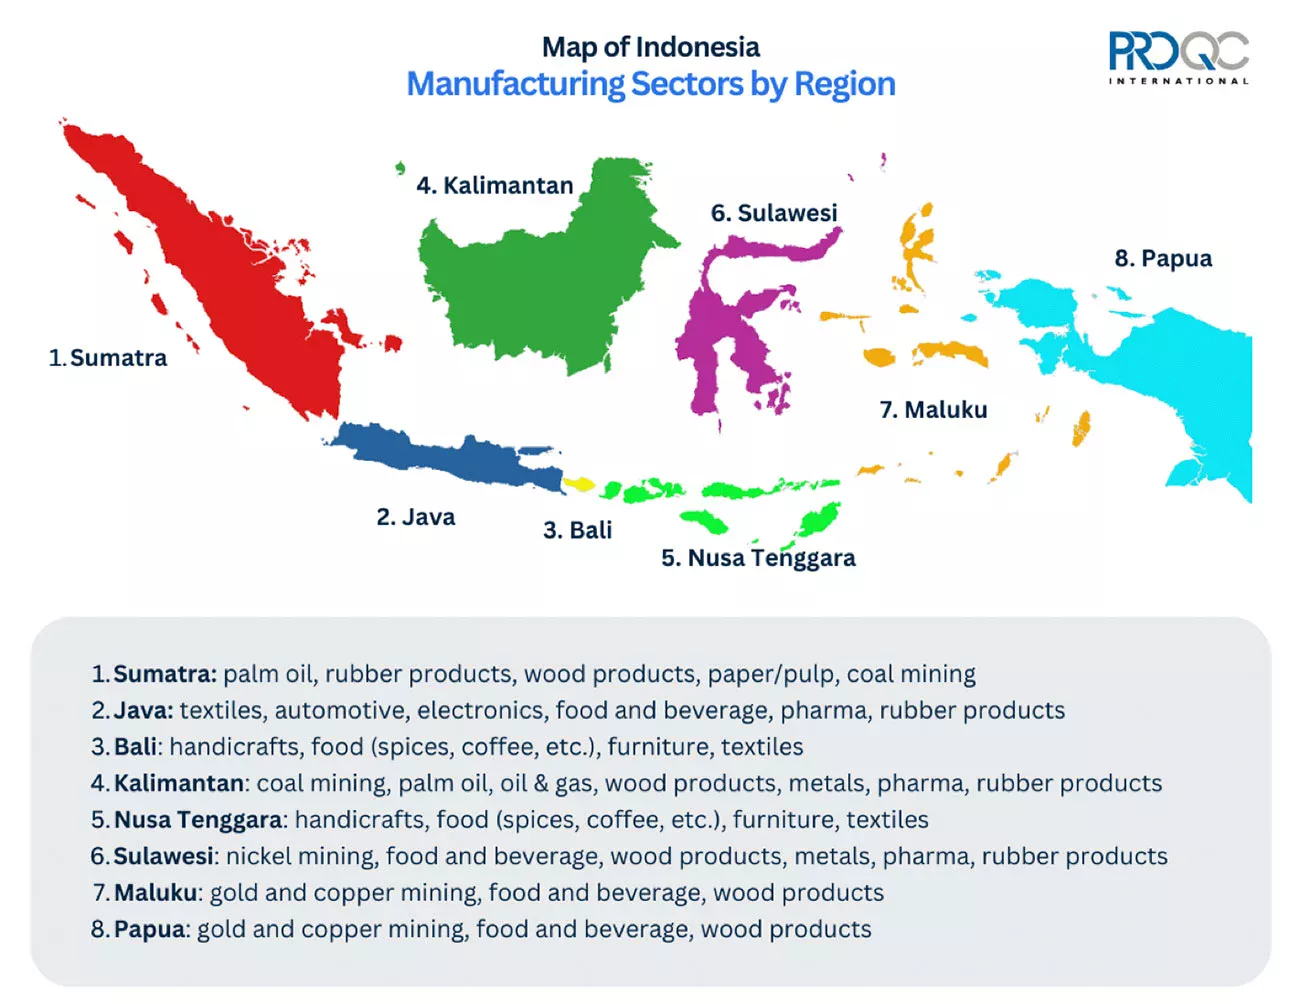 Main Indonesian Manufacturing Sectors